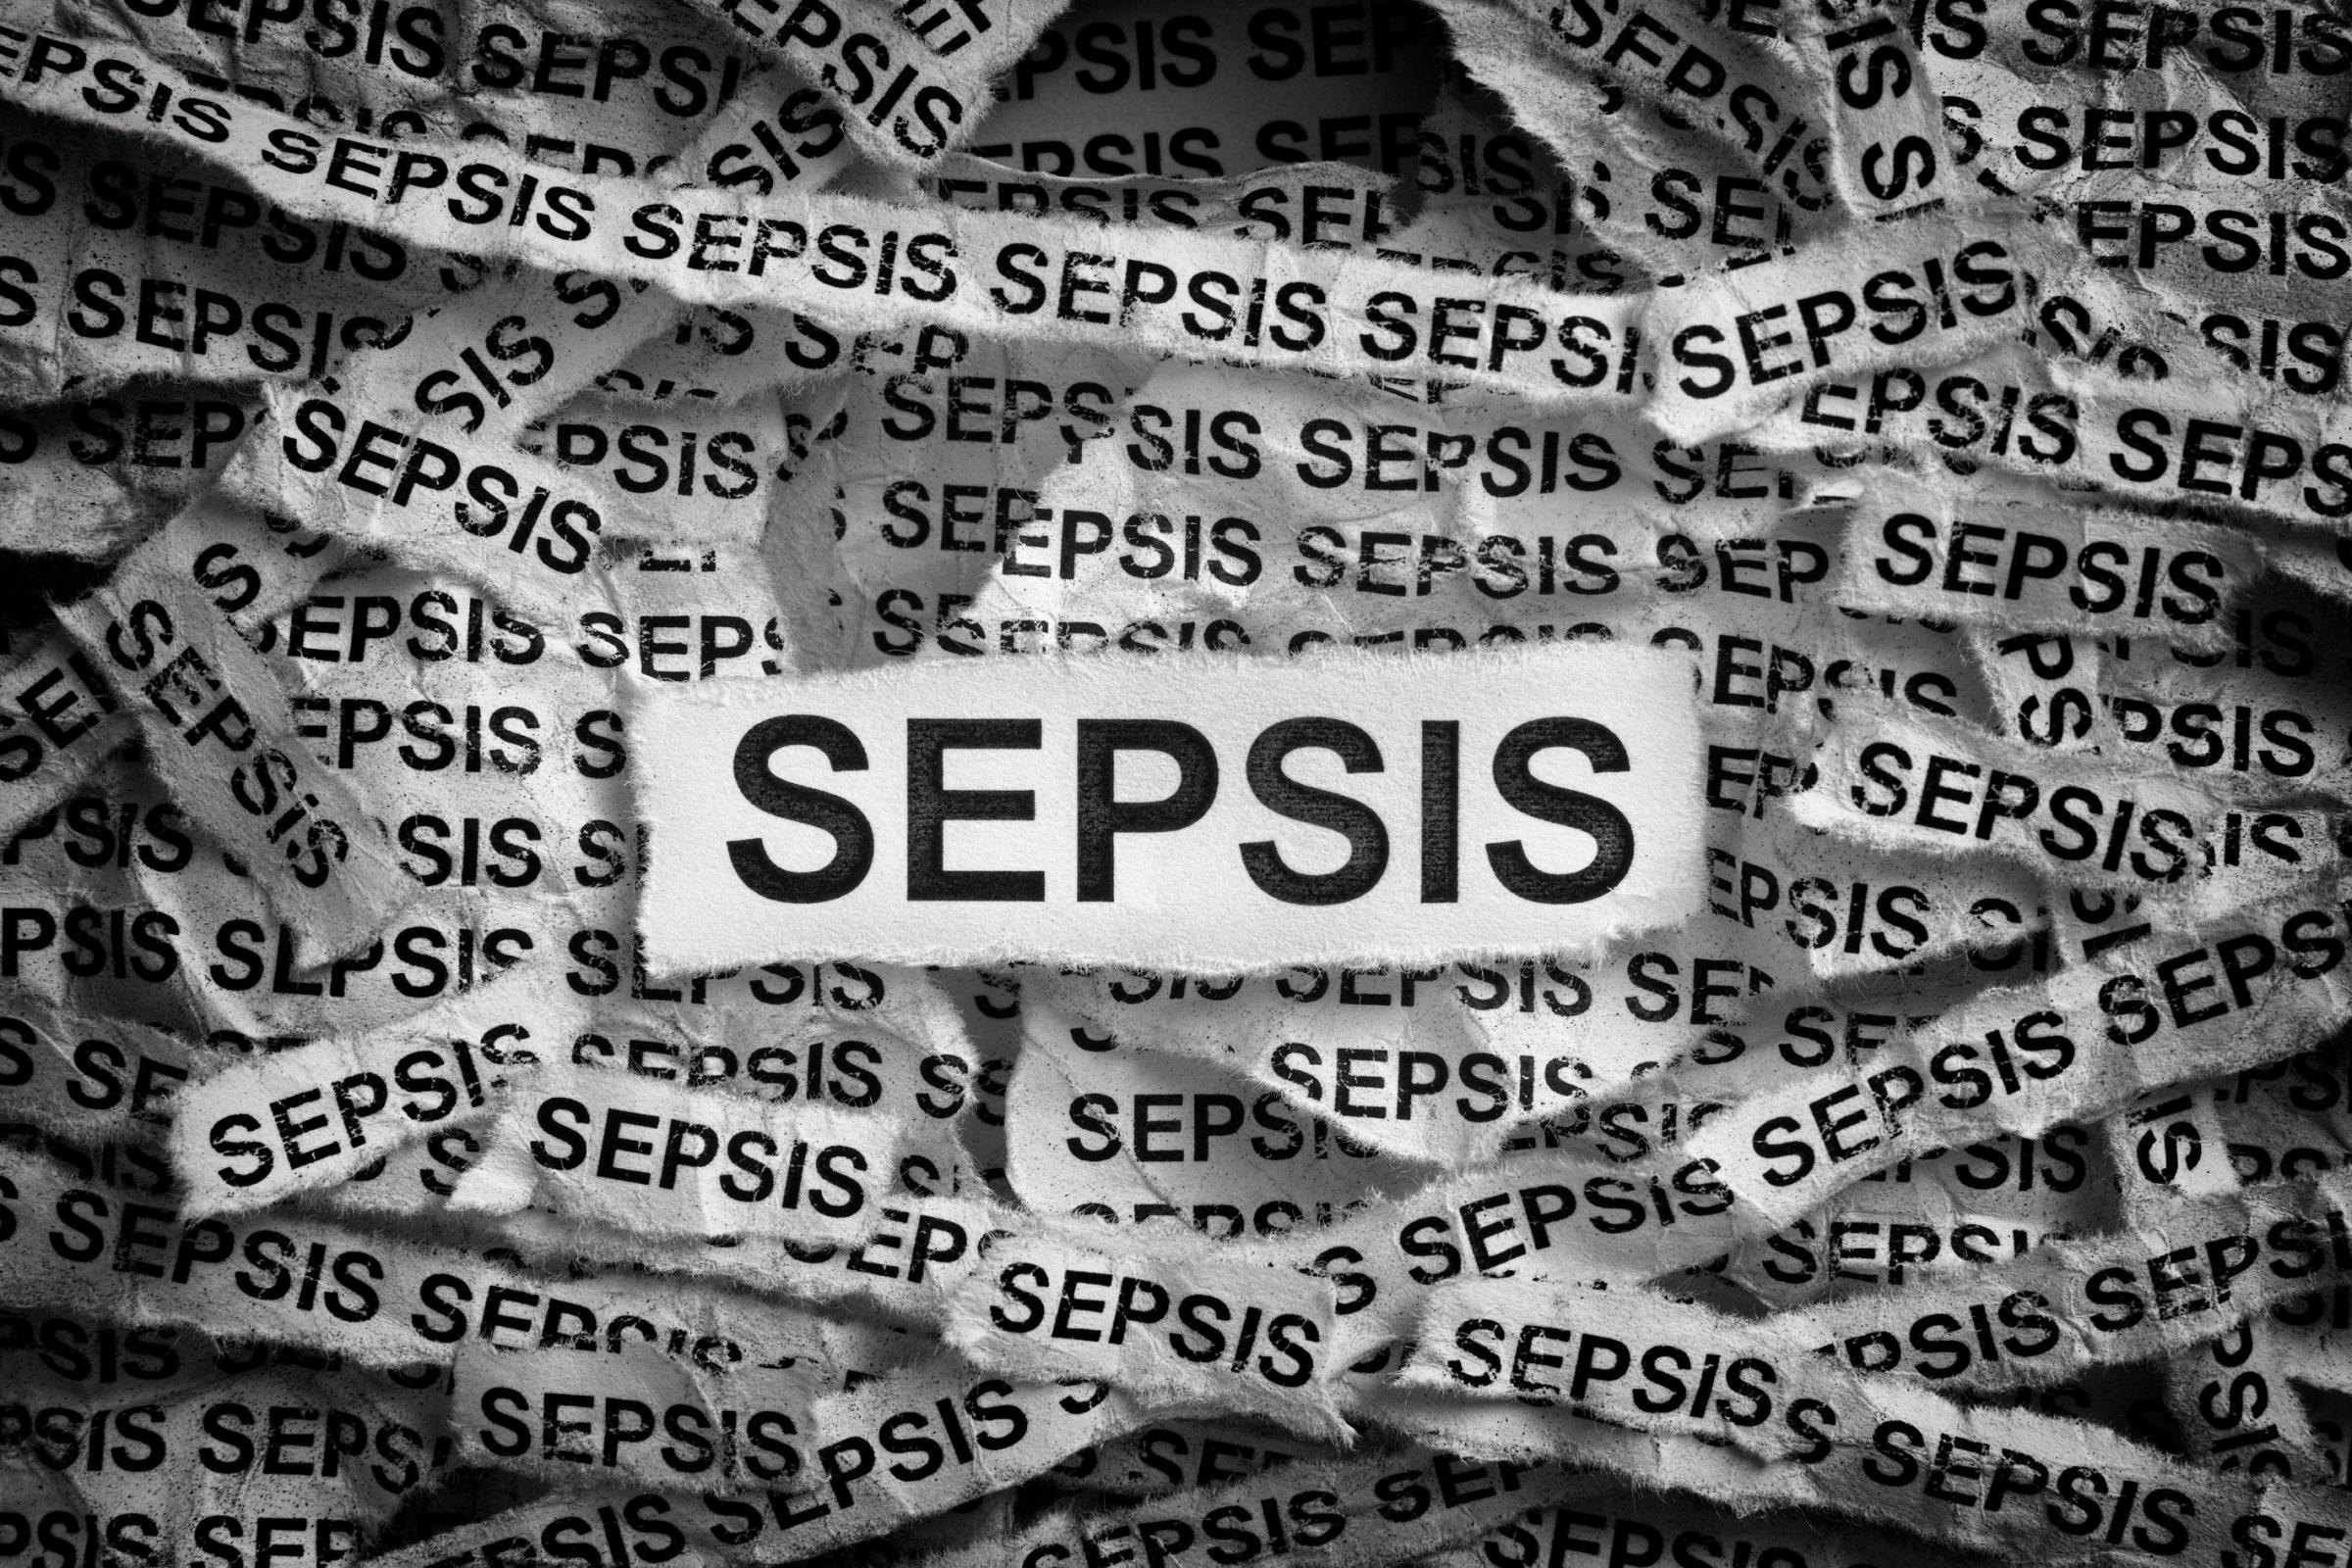 Health: Five key signs of deadly sepsis that you need to know